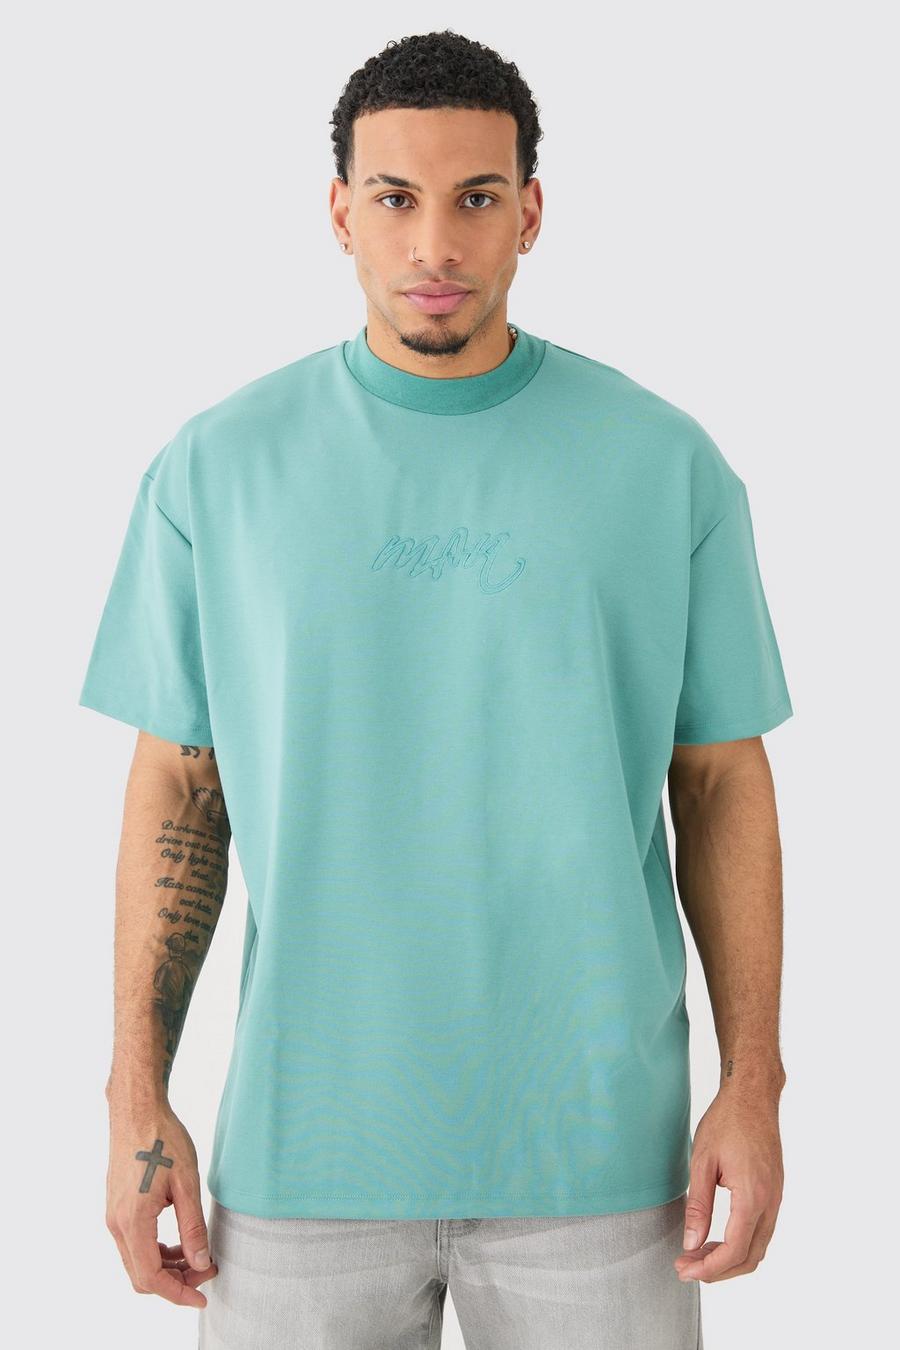 Teal Oversized Premium Super Heavyweight Embroidered T-shirt image number 1